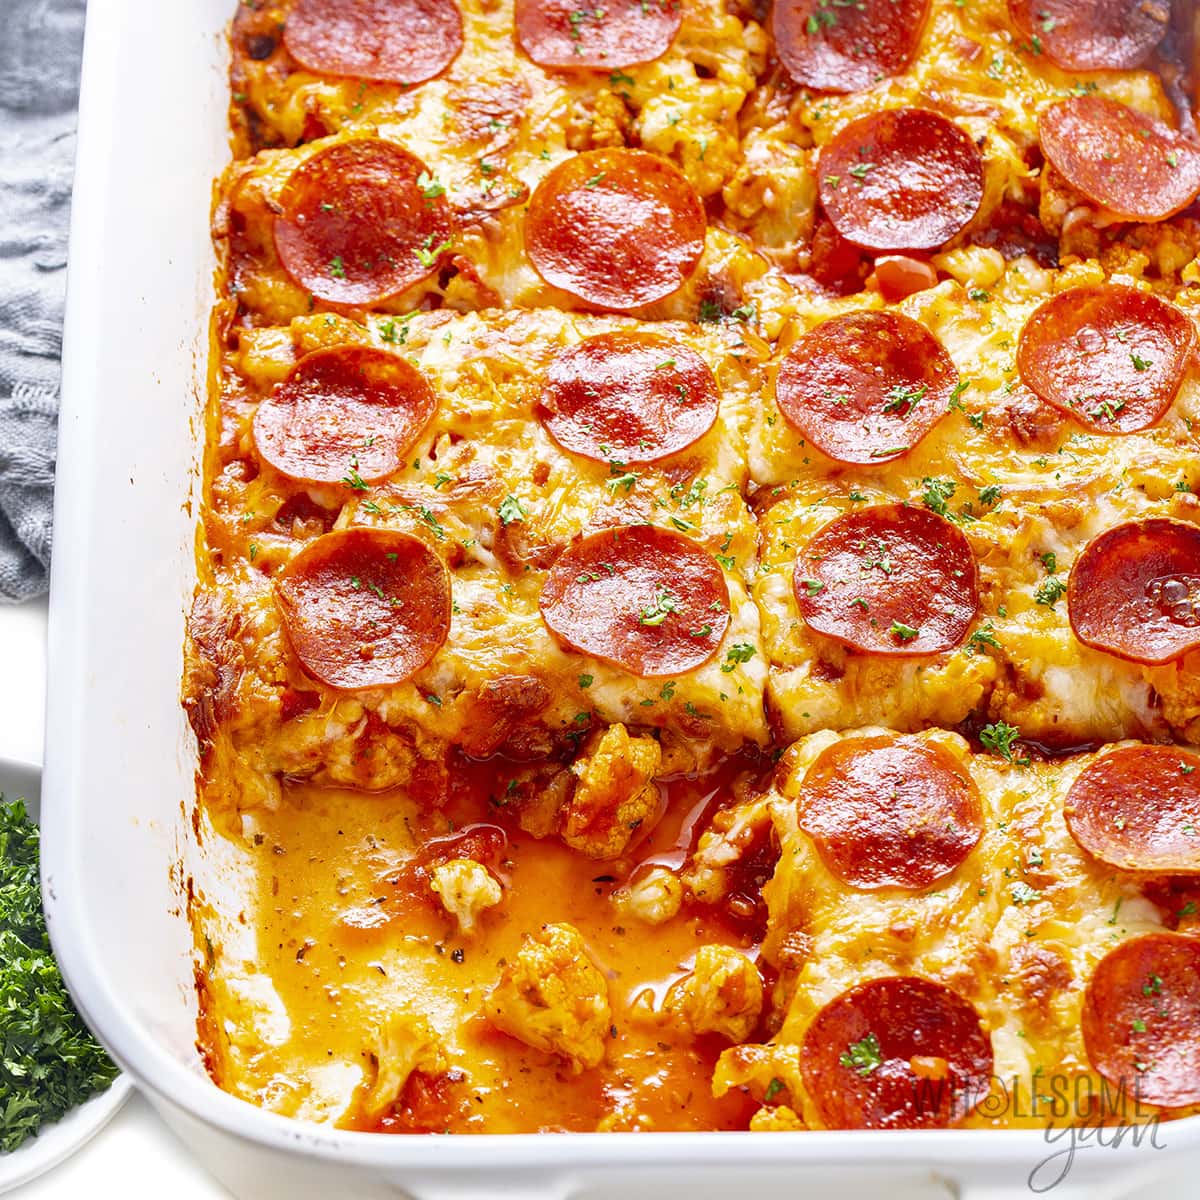 Finished pepperoni pizza casserole with a serving removed.